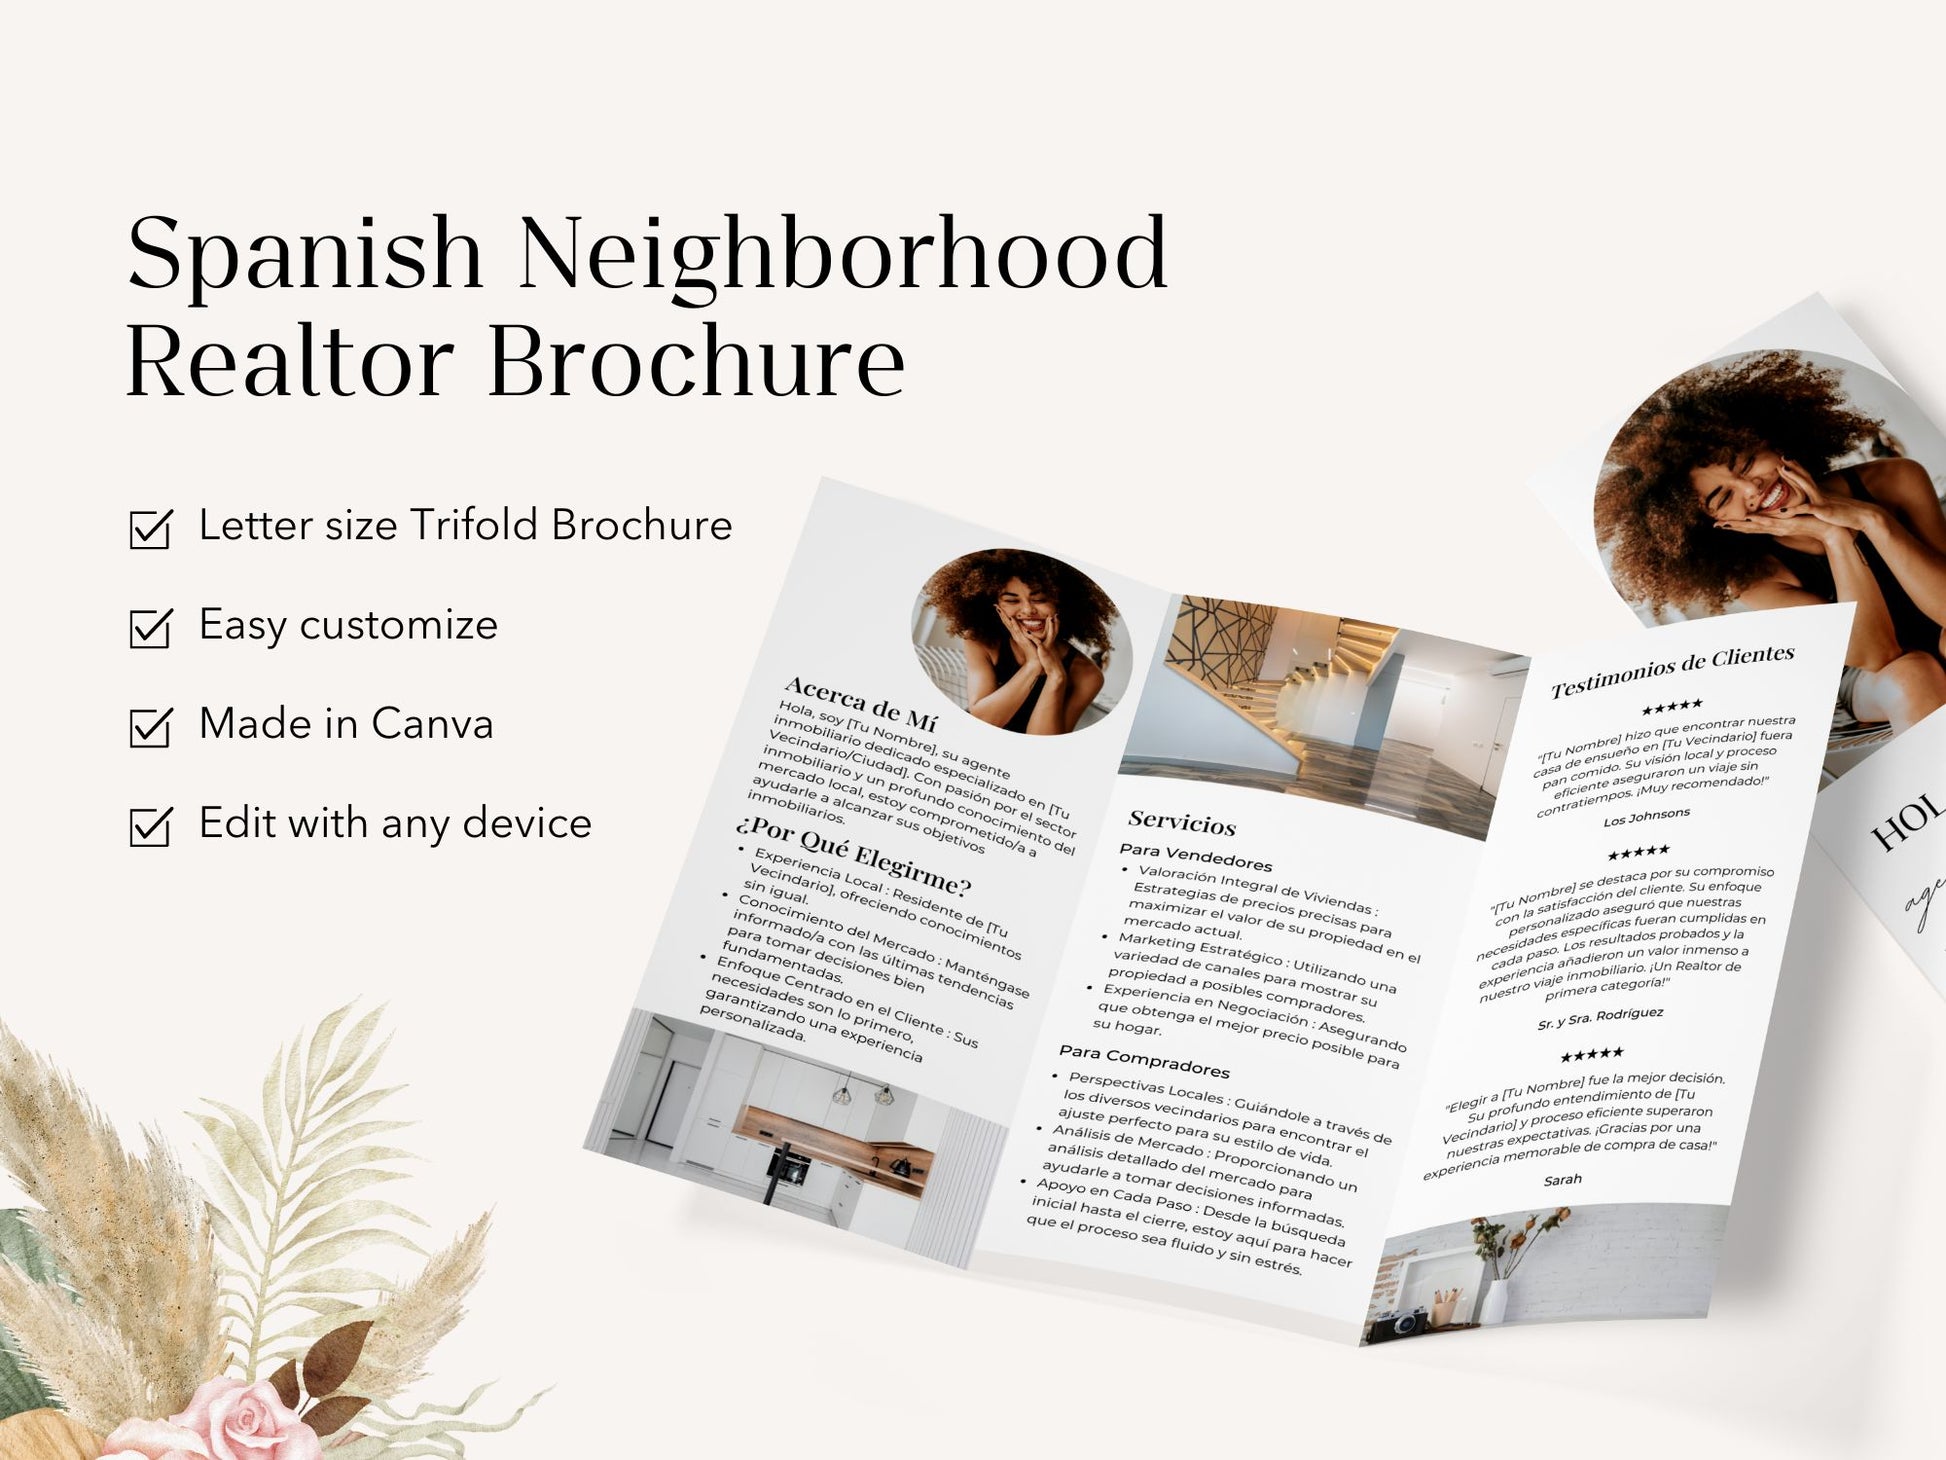 Spanish Neighborhood Realtor Brochure - Engage your Spanish-speaking audience with our tailored brochure.